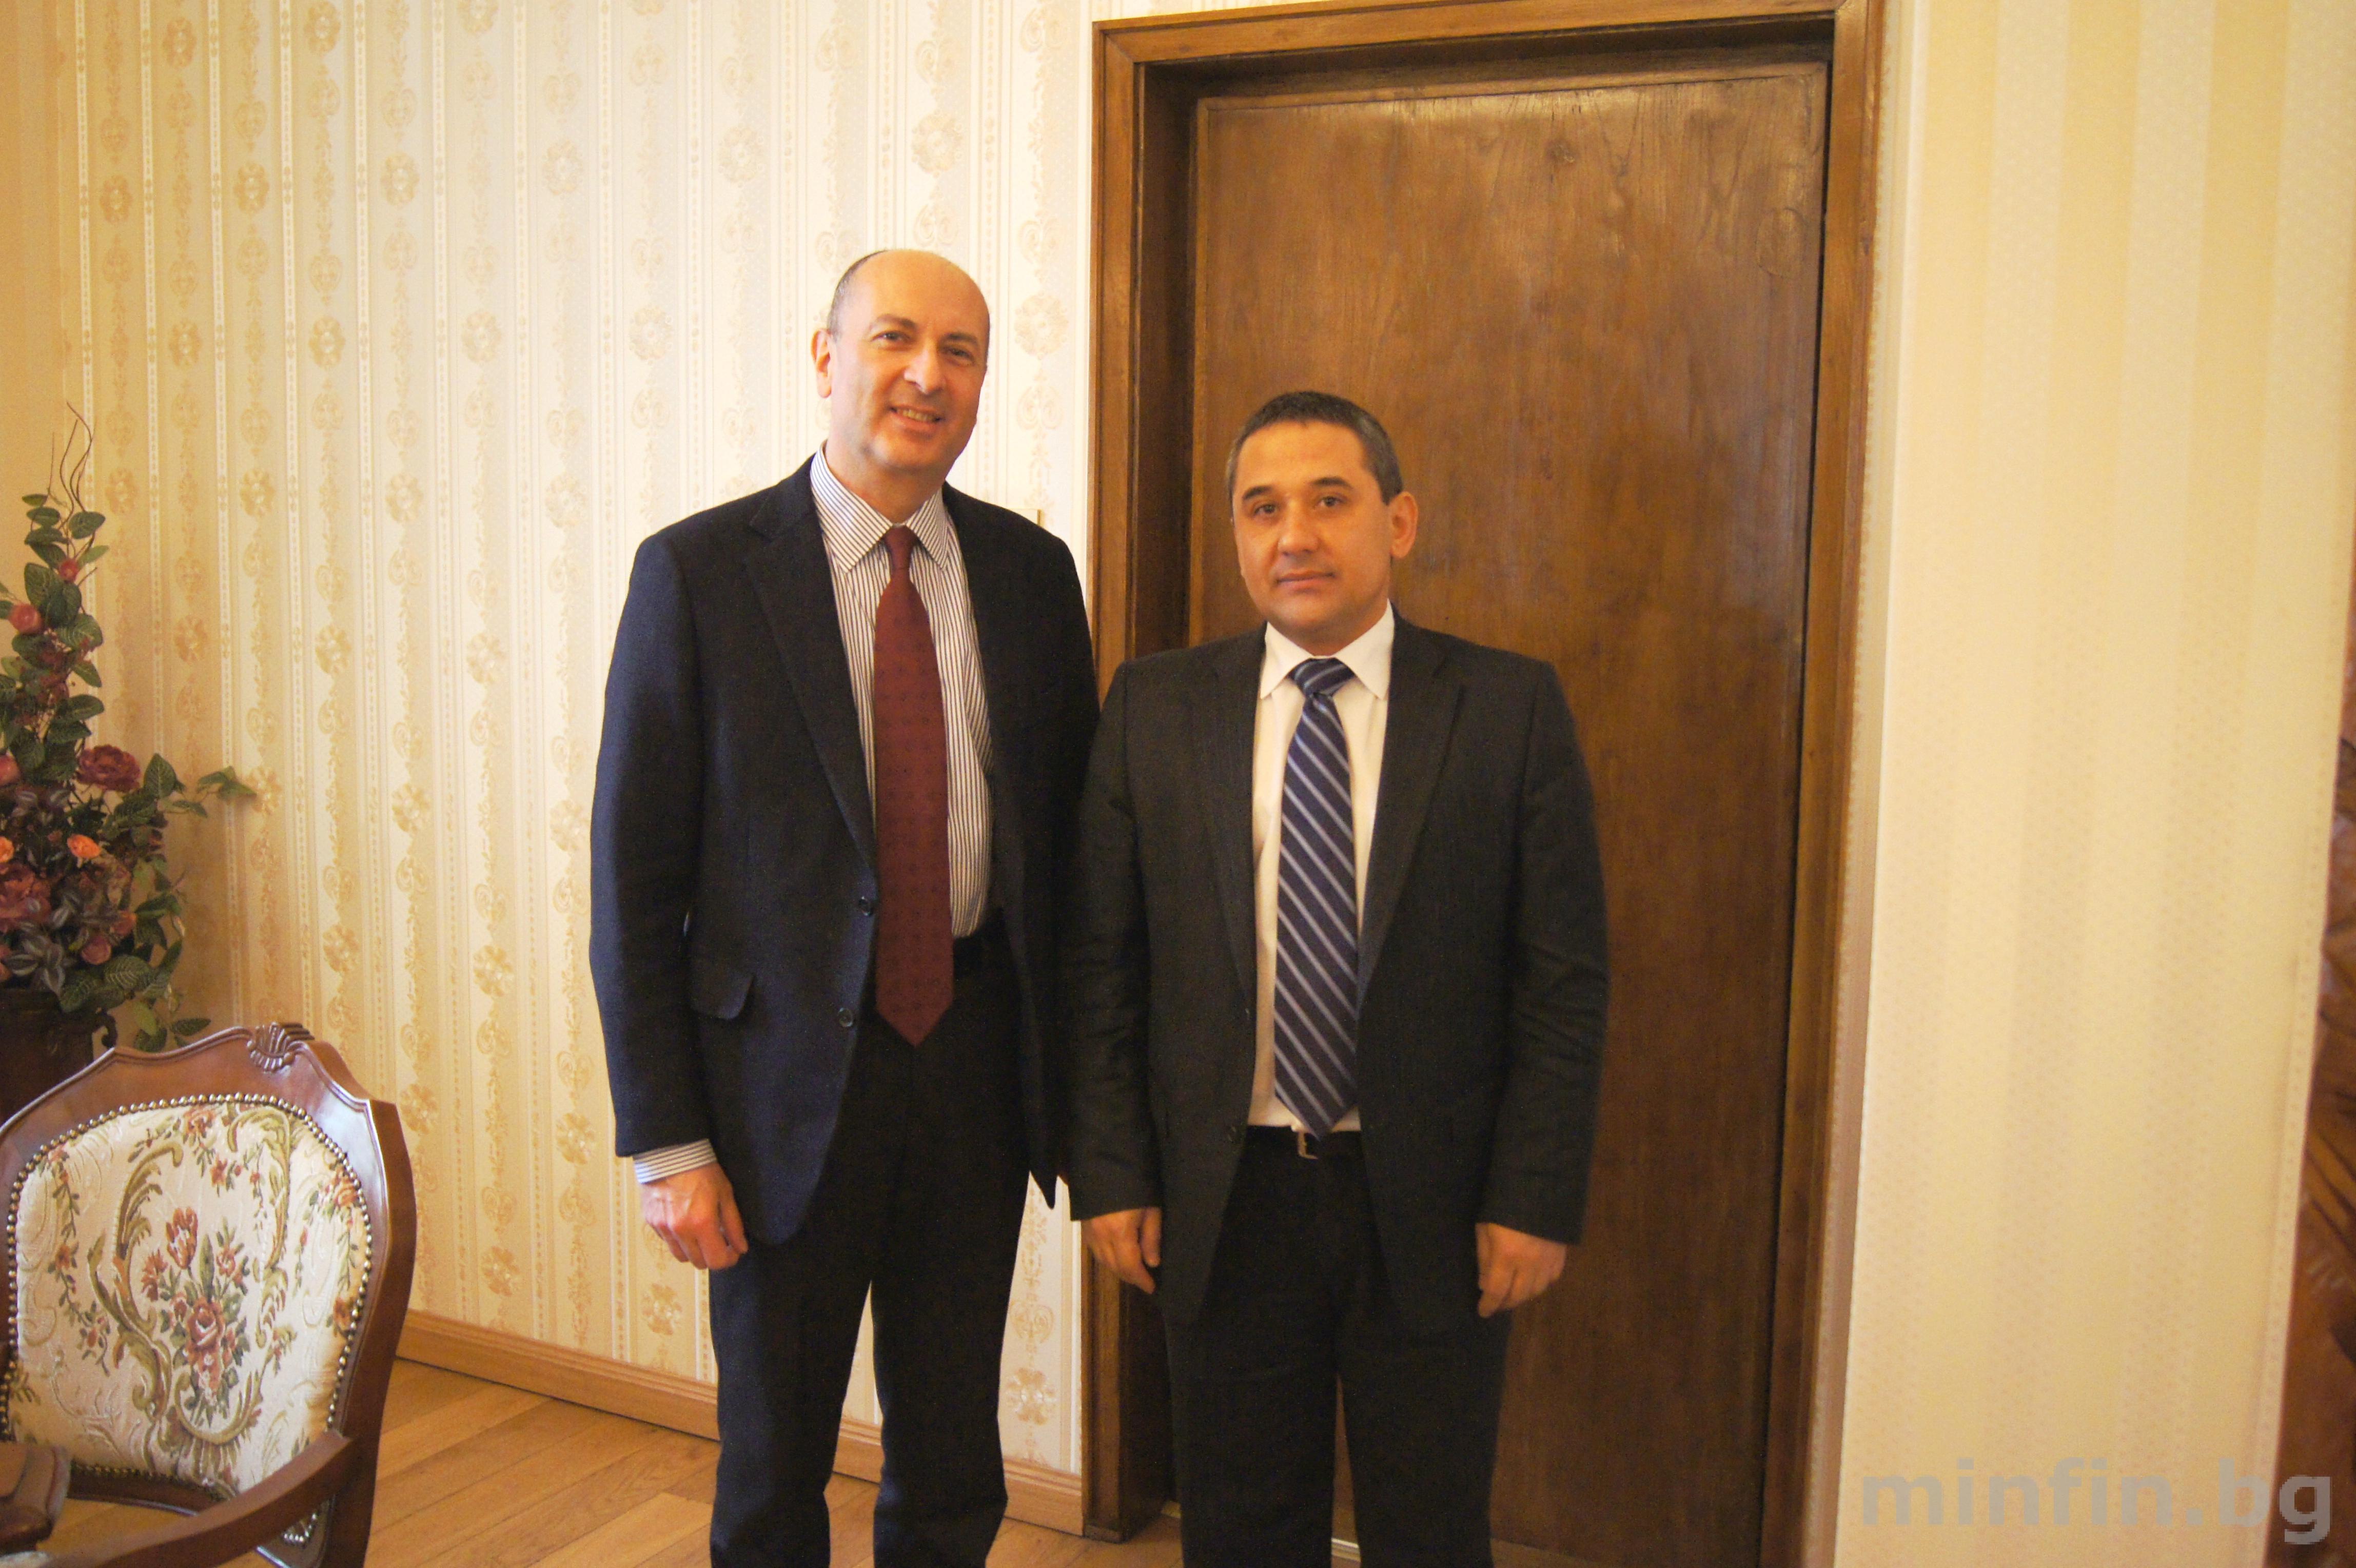 MINISTER OF FINANCE KALIN HRISTOV MET WITH THE SECRETARY GENERAL OF THE EUROPEAN BANK FOR RECONSTRUCTION AND DEVELOPMENT ENZO QUATTROCIOCCHE